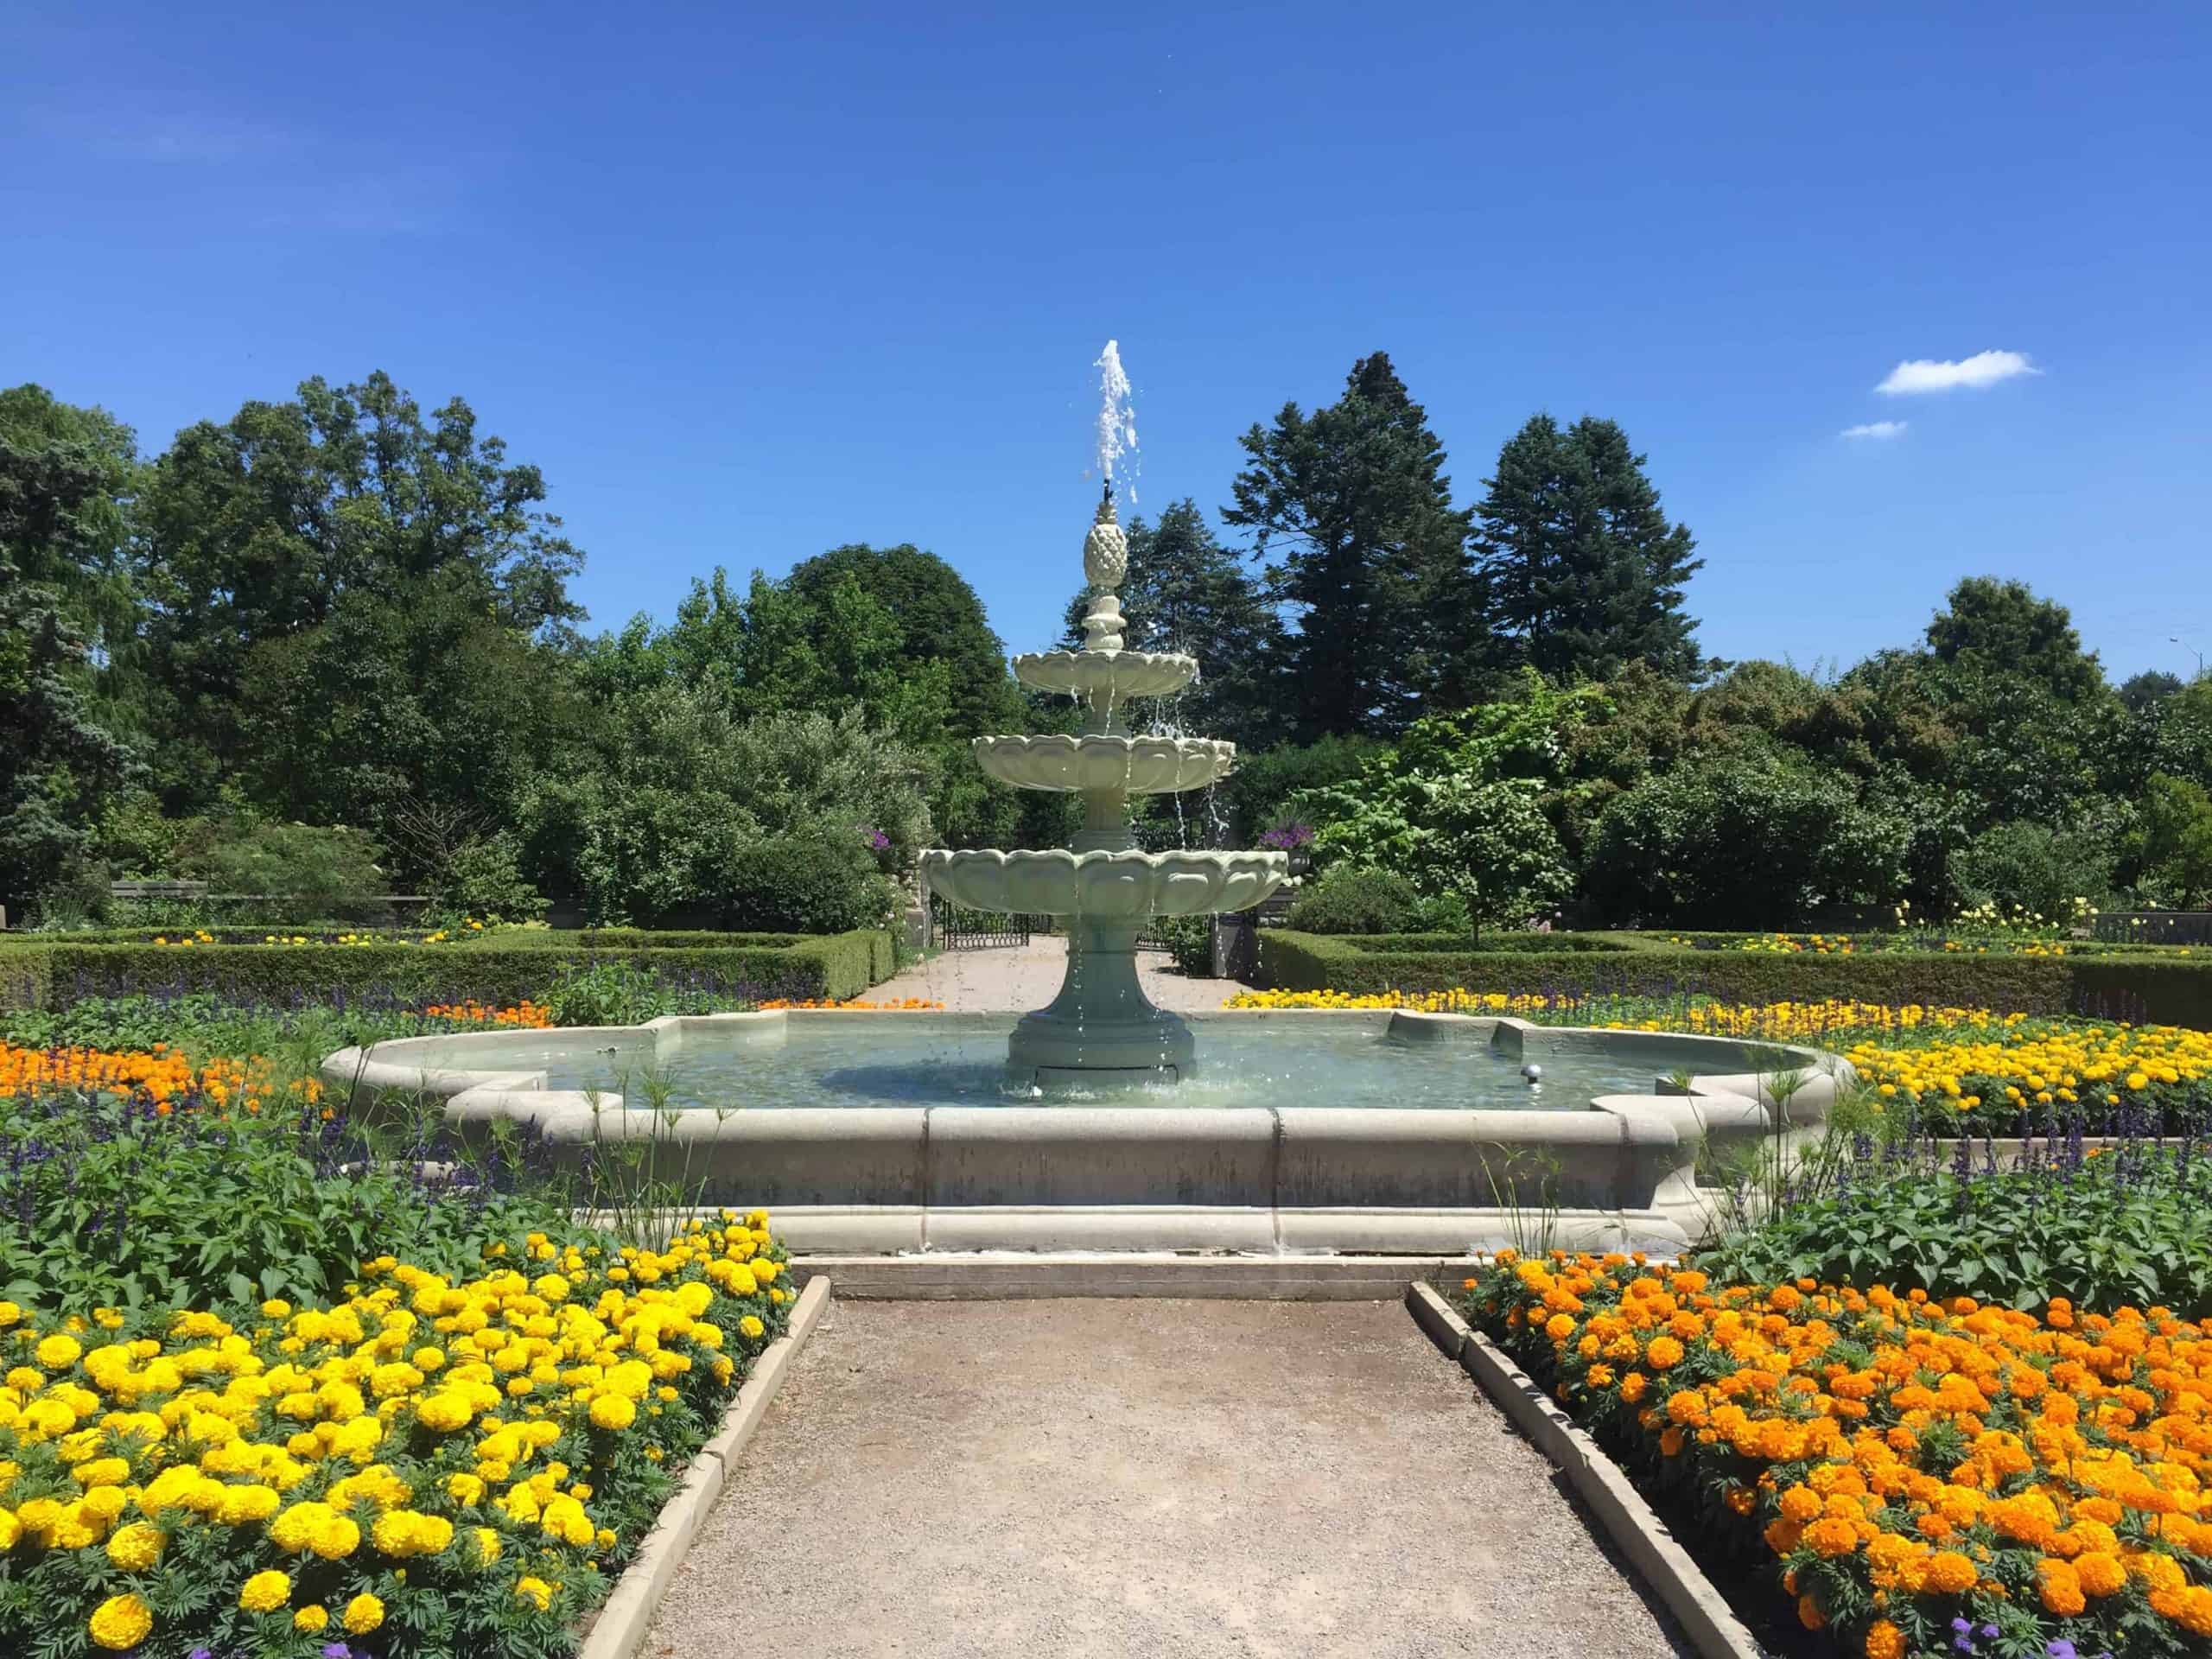 The Royal Botanical Gardens on a Summer's Day - Gone With The Family